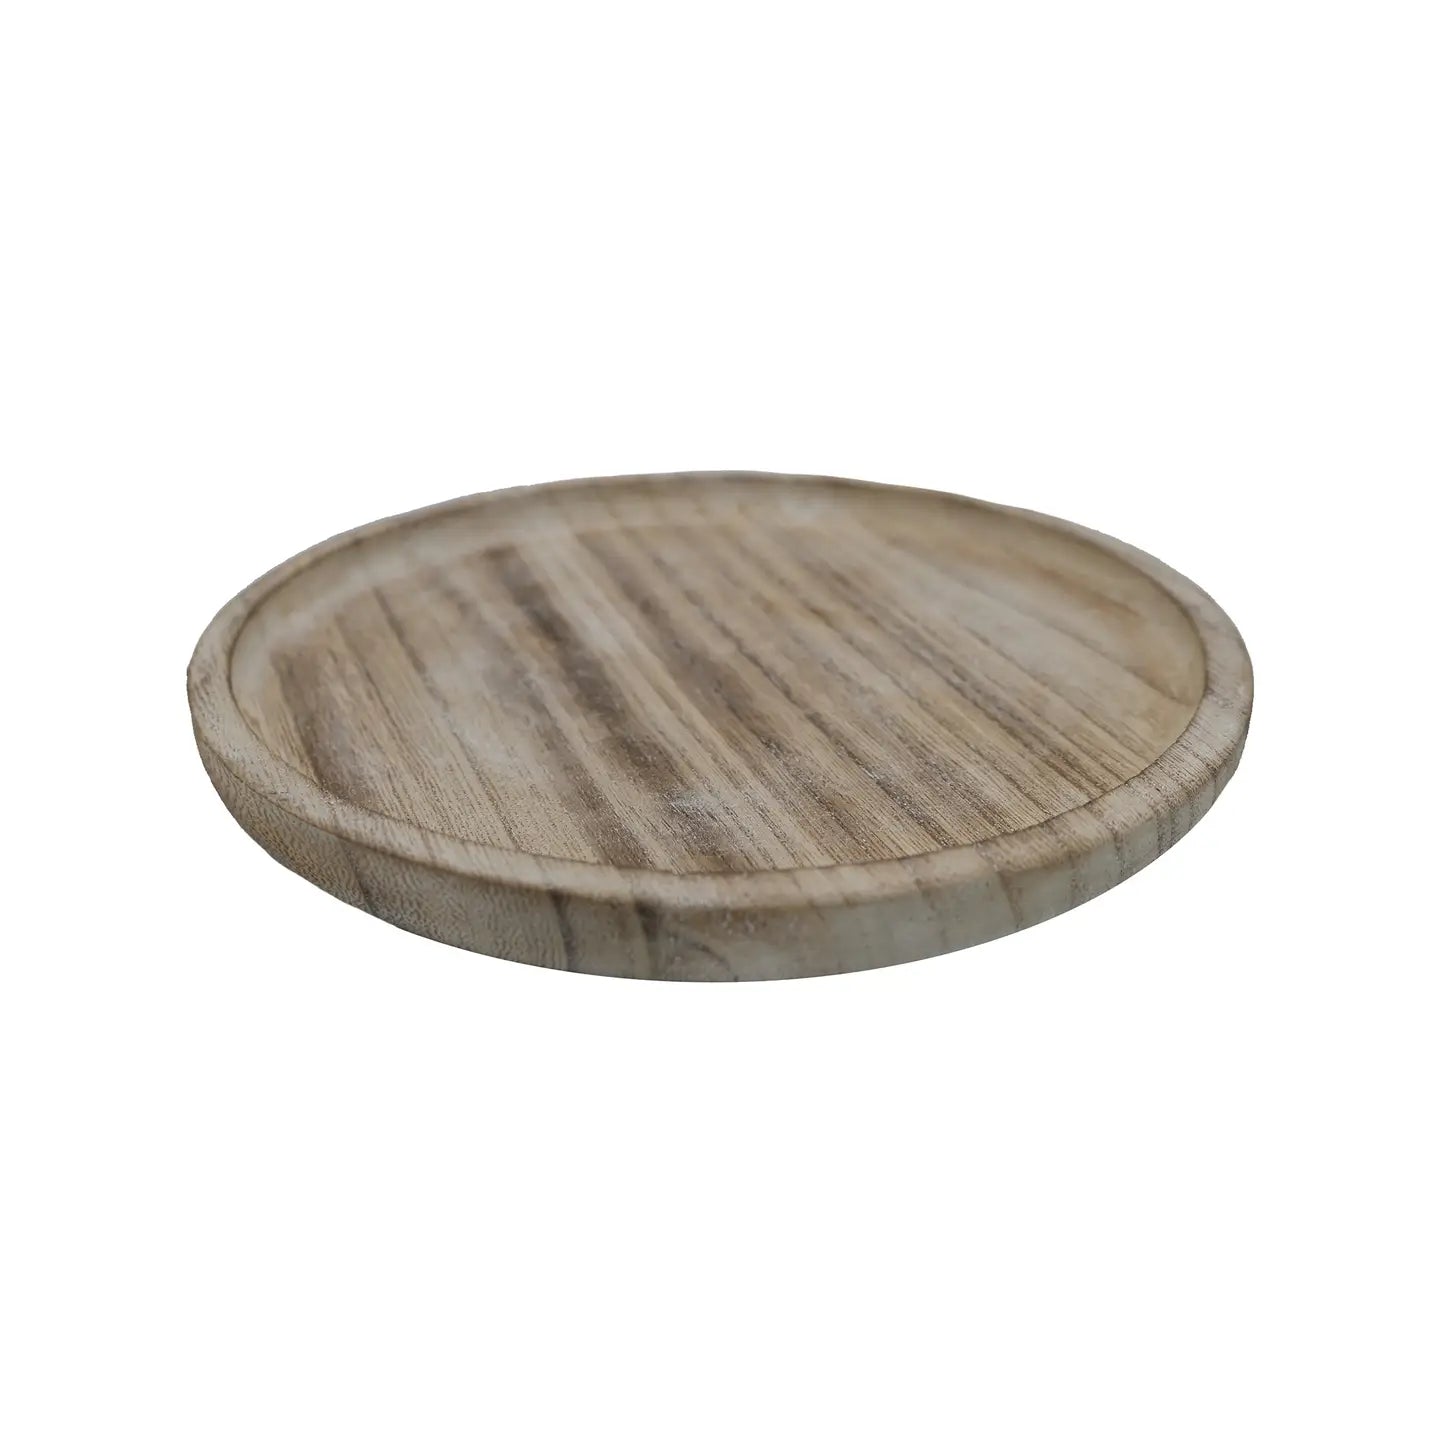 Rustic Round Wood Tray - Home Decor & Gifts